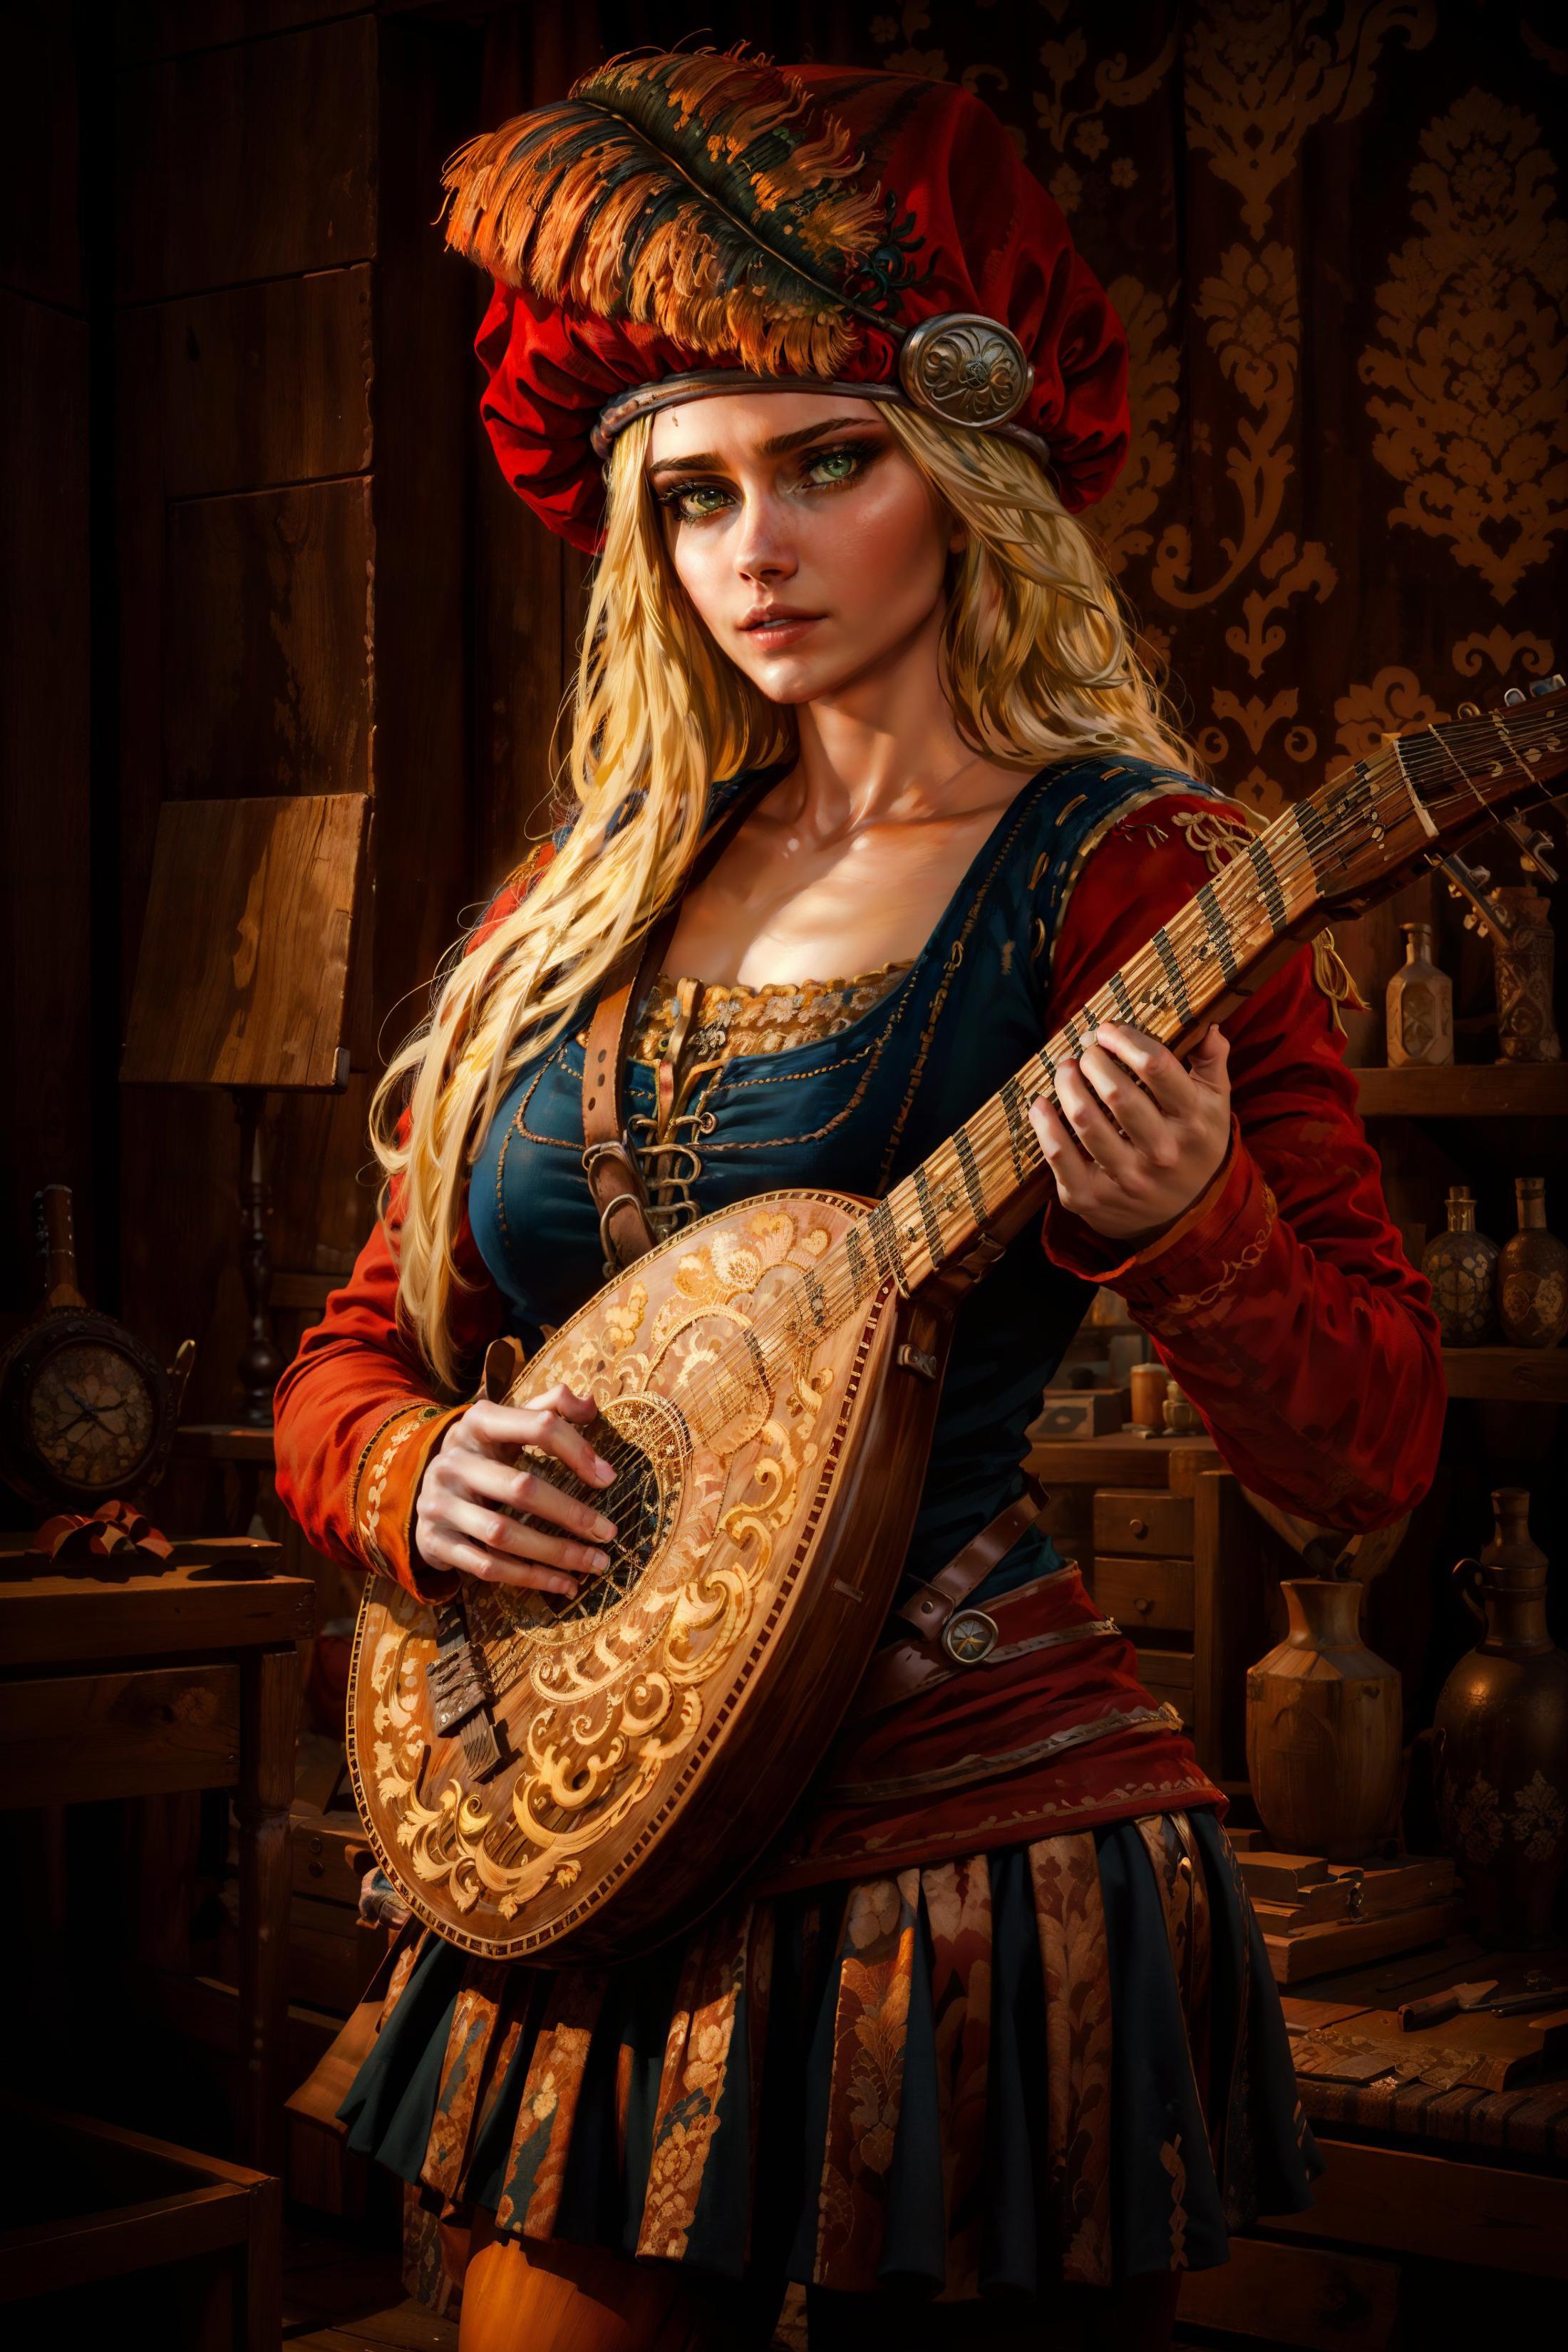 Priscilla | The Witcher 3 : Wild Hunt image by soul3142